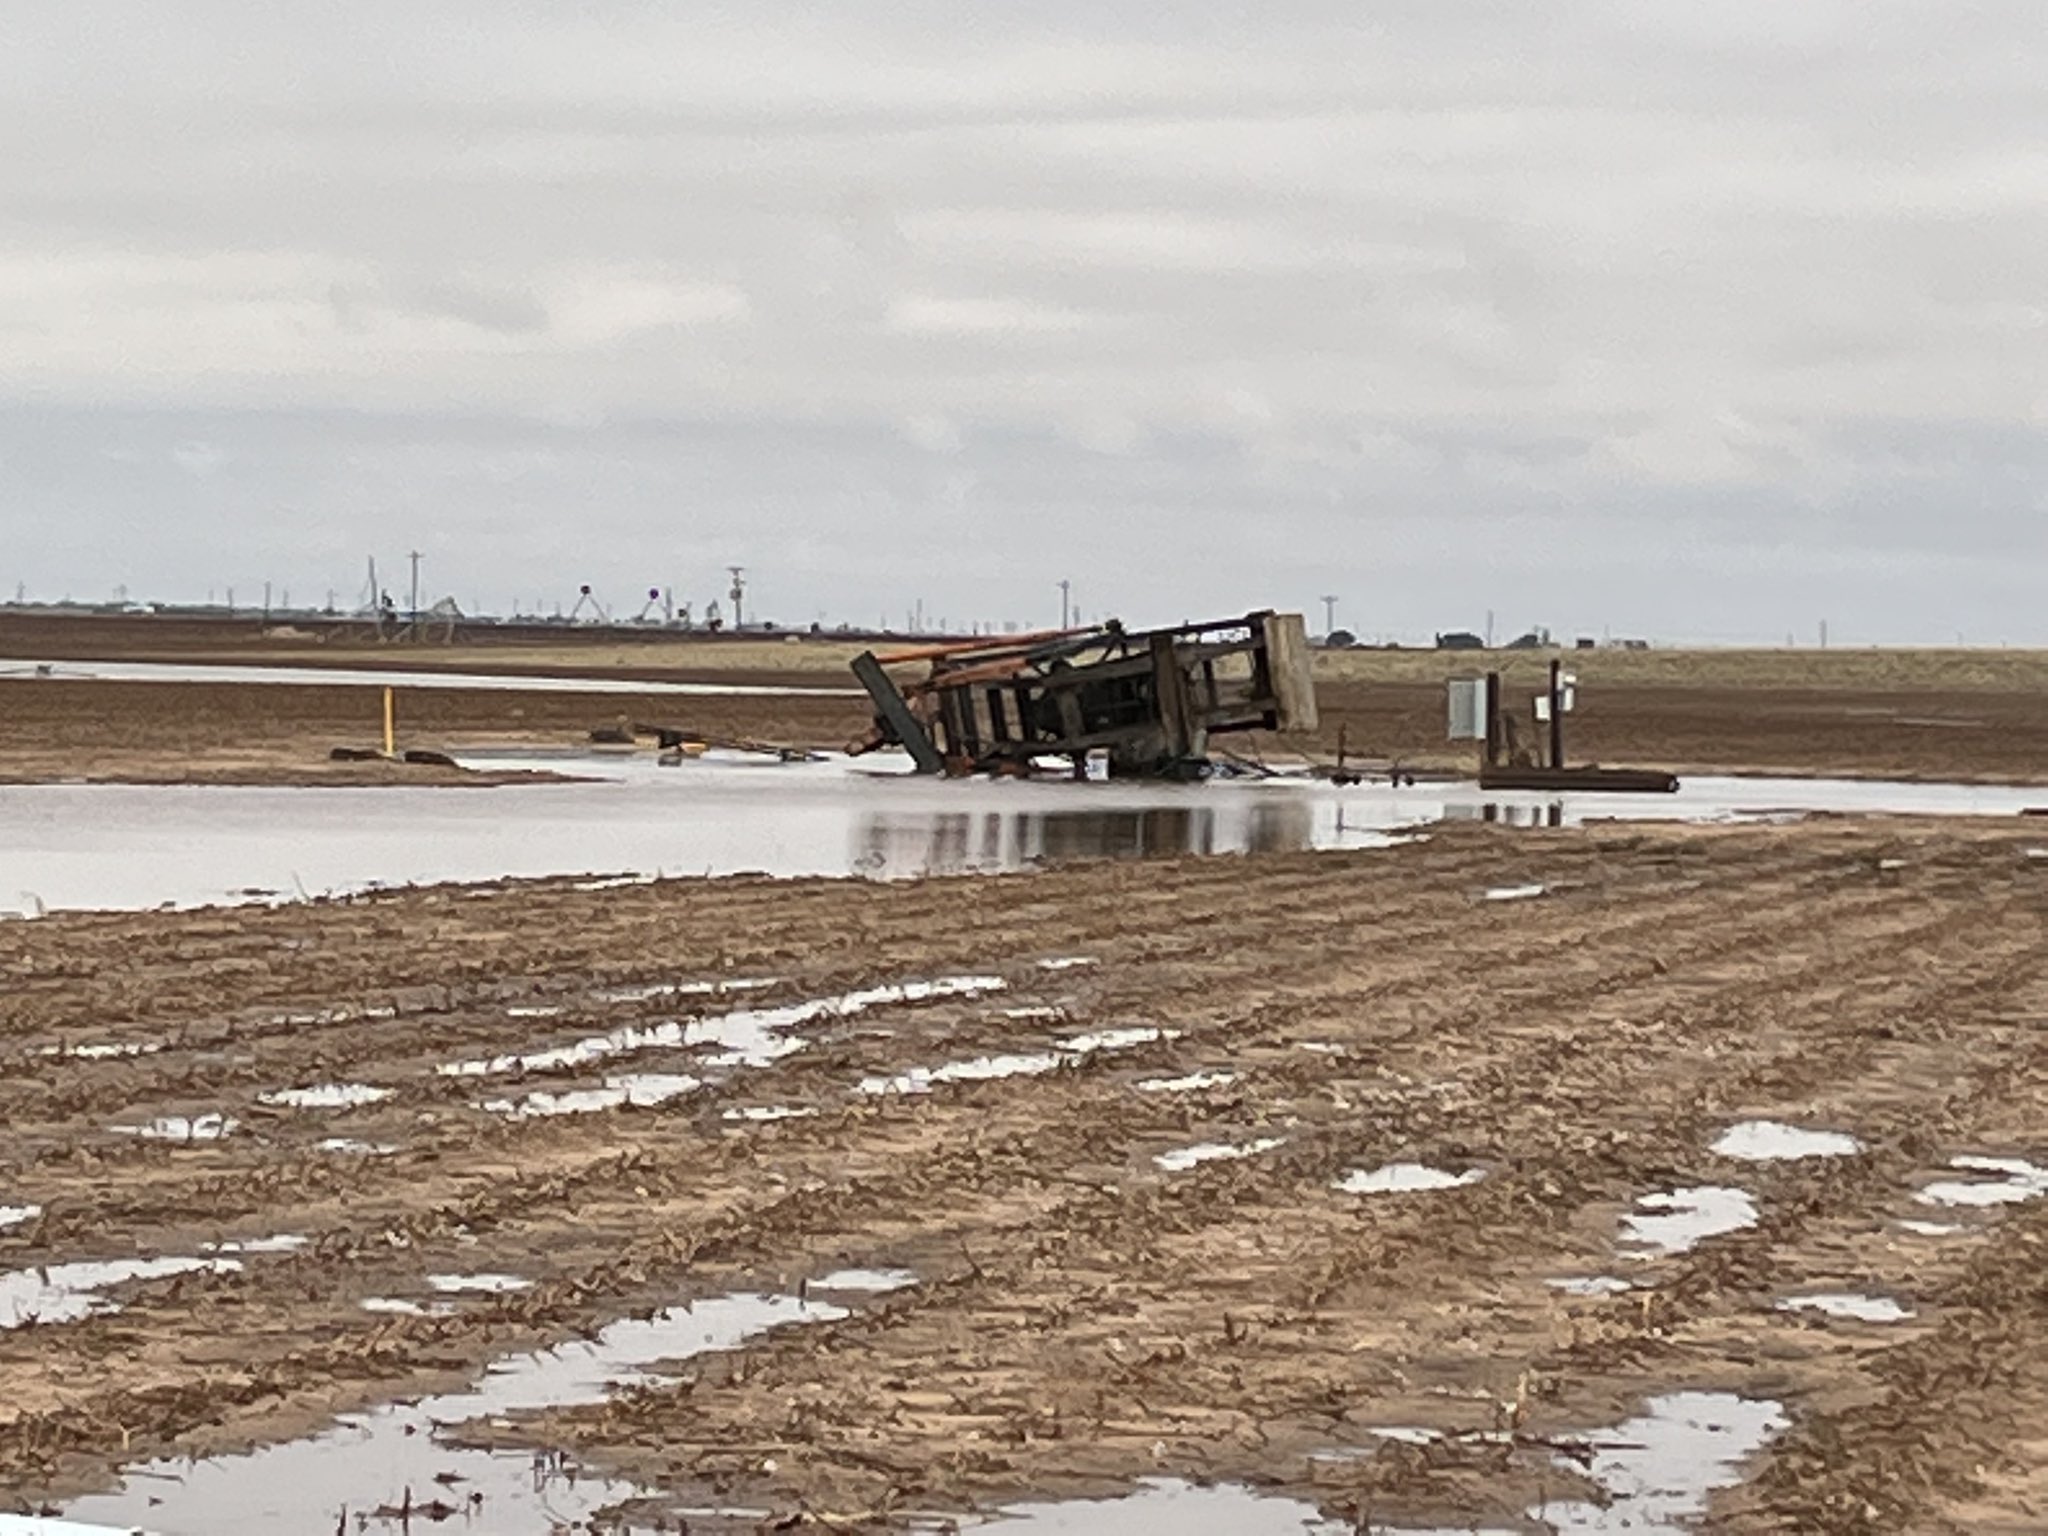 Oil derrick damaged by the tornadic storm that passed north of Morton Monday evening (23 May 2022). The picture is courtesy of Shelly@ttushell.